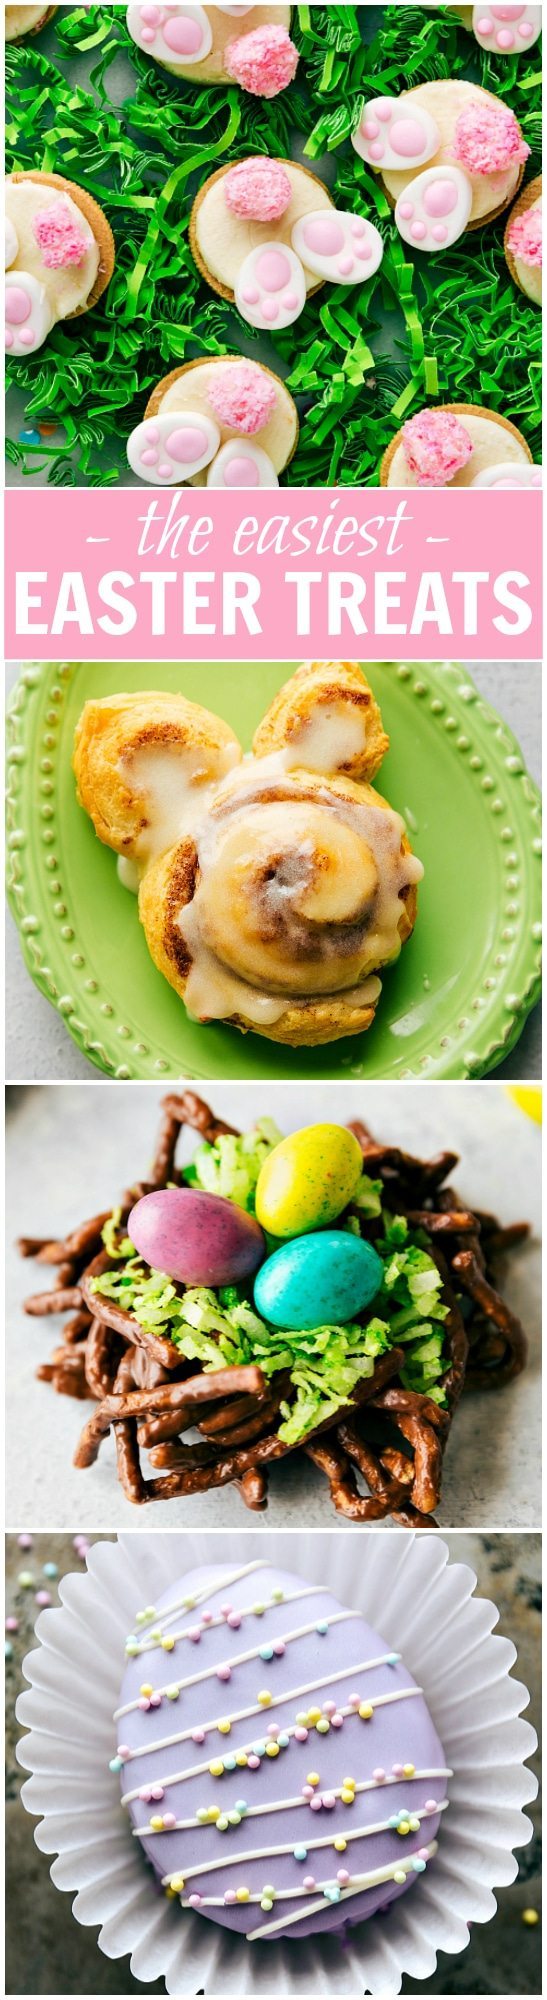 4 Simple Easter Treats that require little effort and time and few ingredients -- Bunny Bum Cookies, Easter Bunny Cinnamon Rolls, Easter Egg Nests, and Mini Egg Petit Fours. via chelseasmessyapron.com